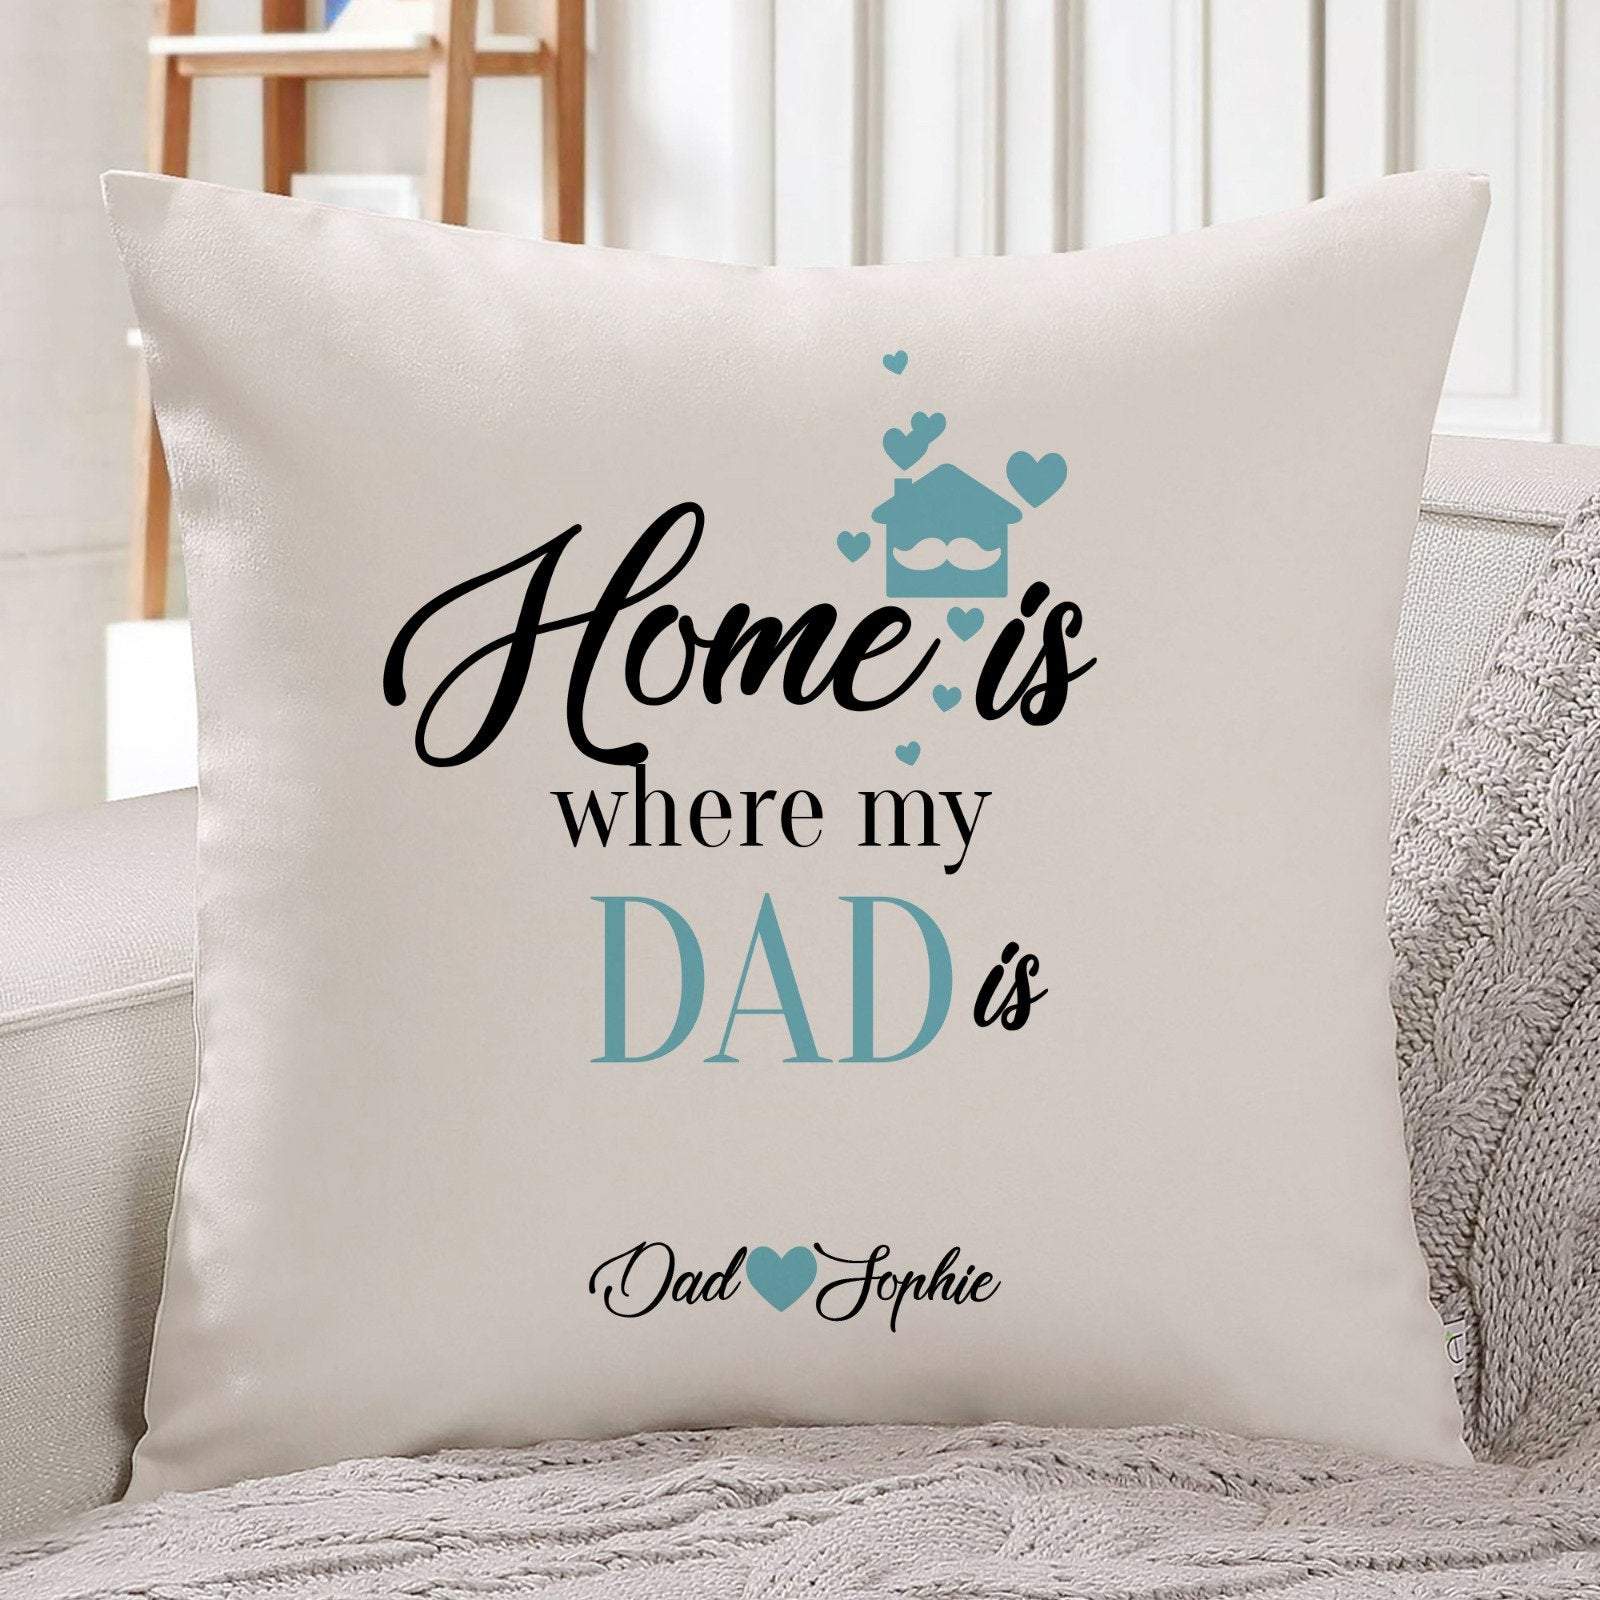 Home is where my dad is personalised cushion cover, Cute Gift for dad, Father's Day gift